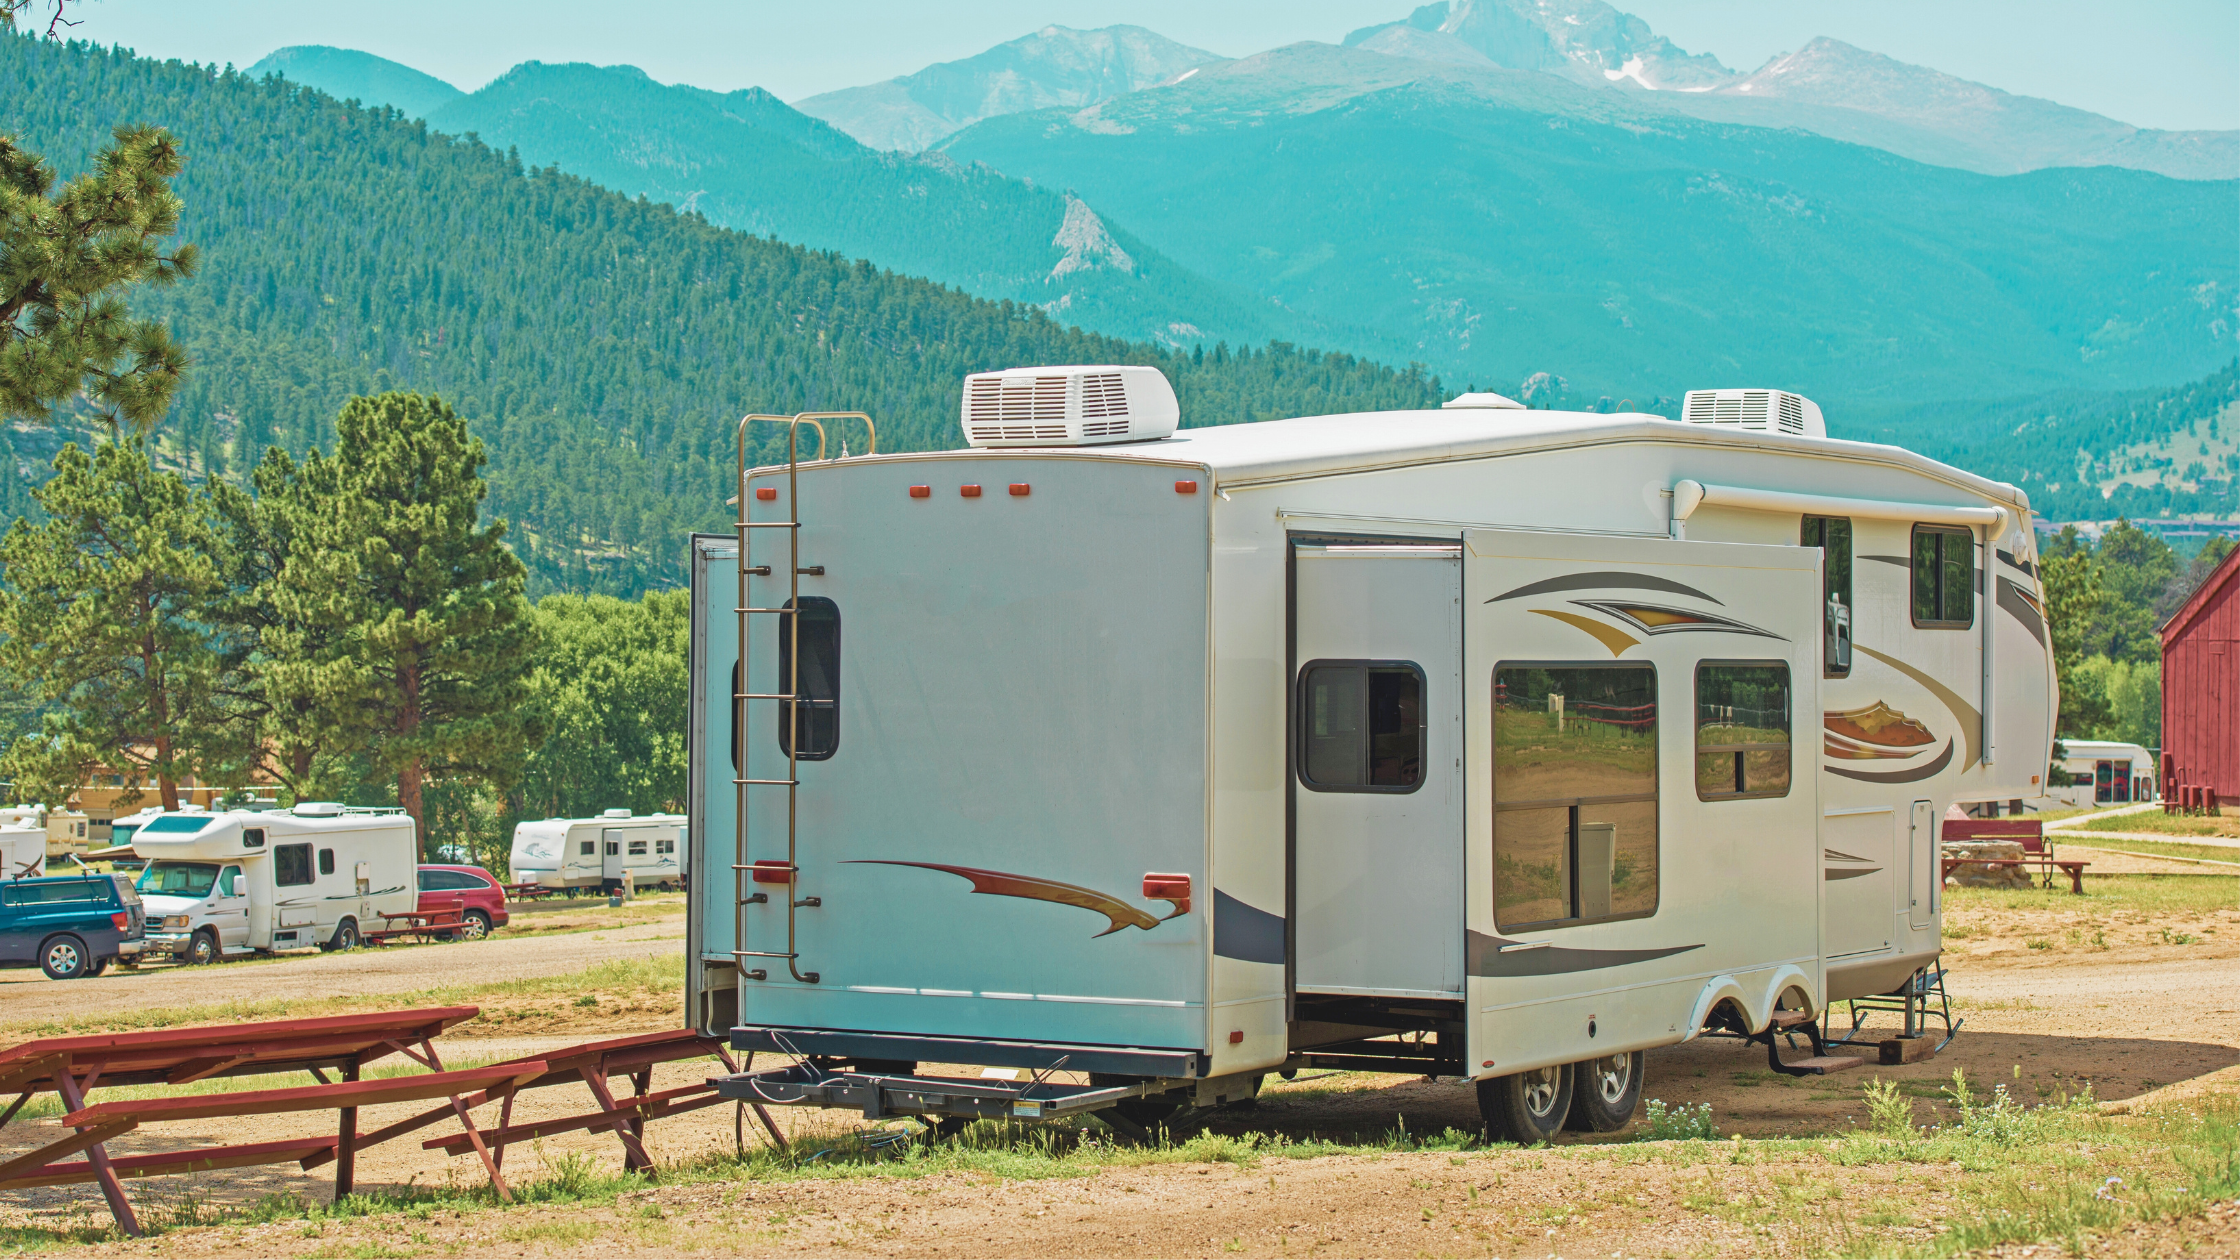 The Benefits of RV Living: Freedom, Adventure, and More